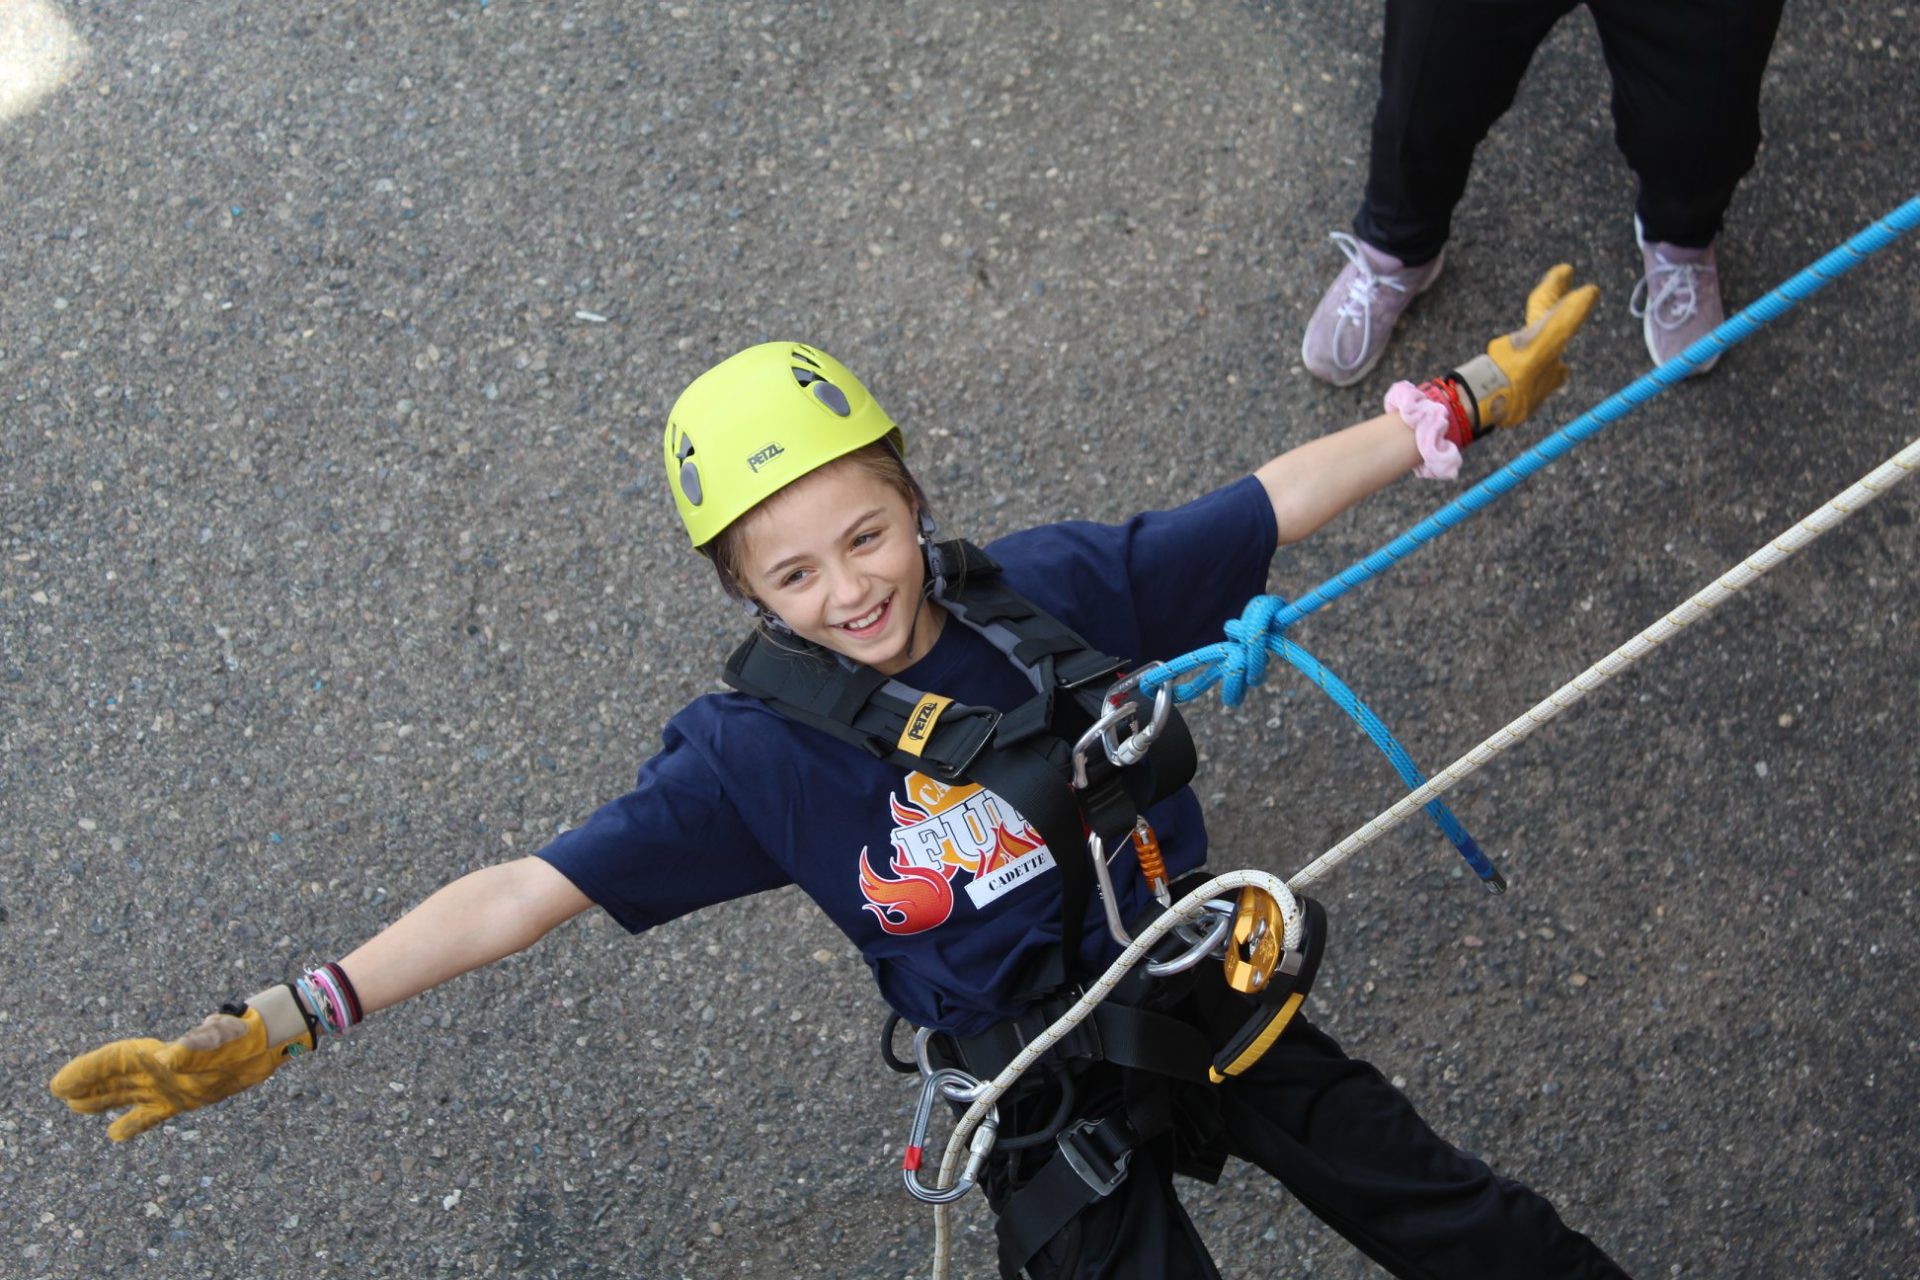 catching fury participant rappelling and smiling